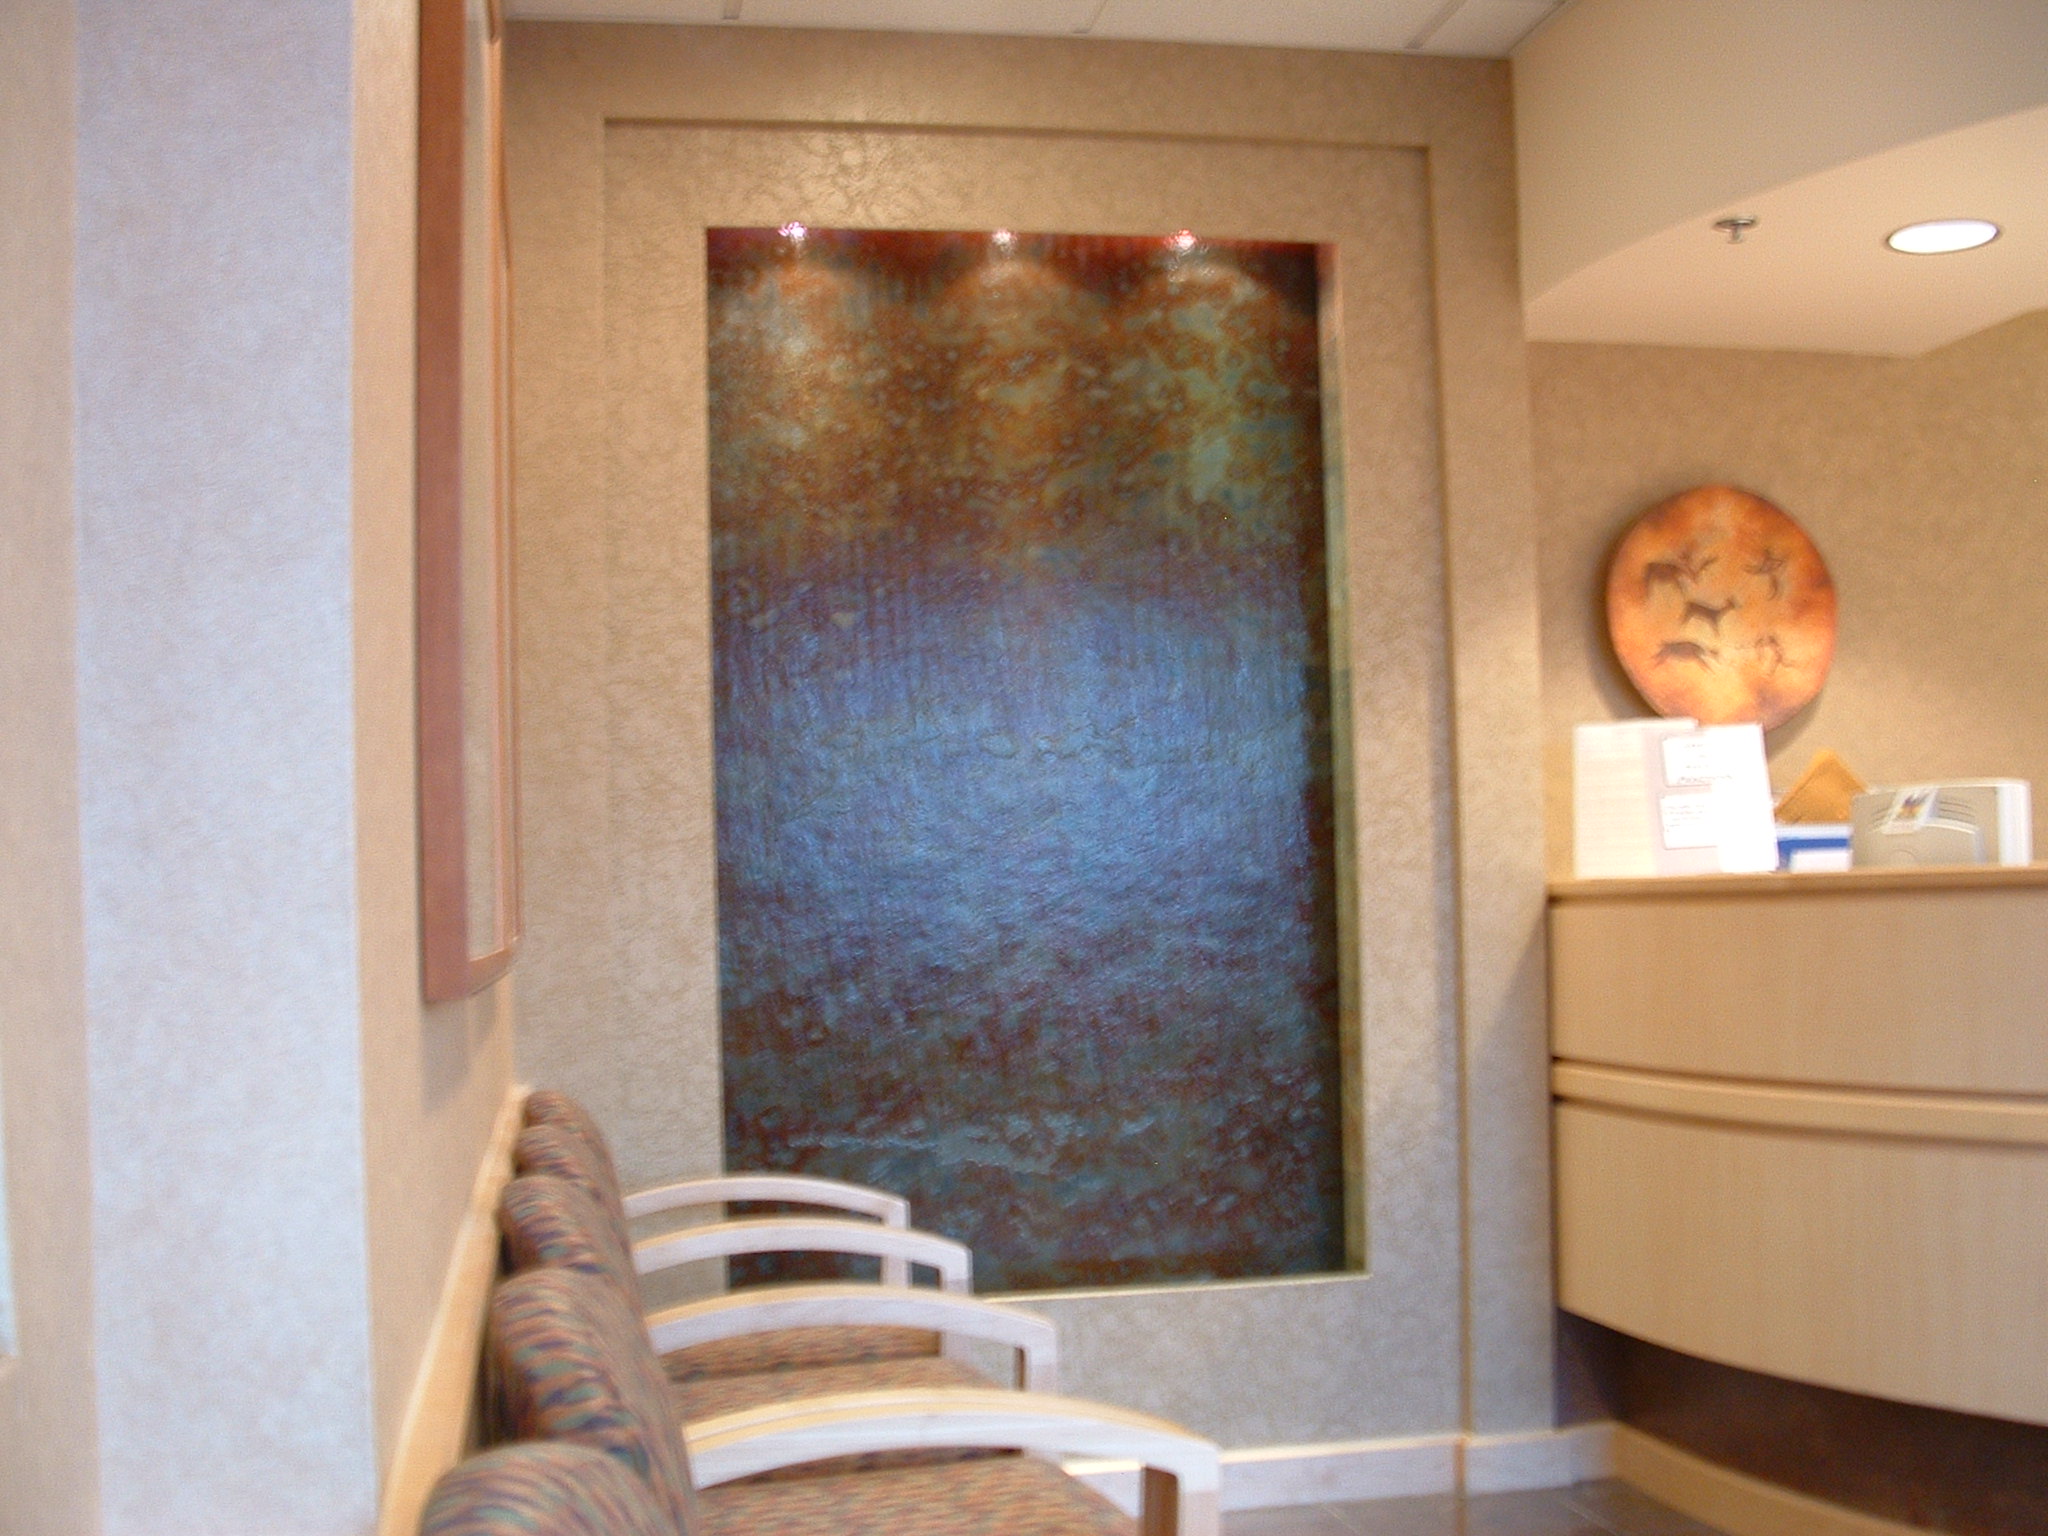 Federal way, WA digestive health specialist waiting room. 4 ft x 8ft slab of rustic   slate back drop lighting in valance new construction.